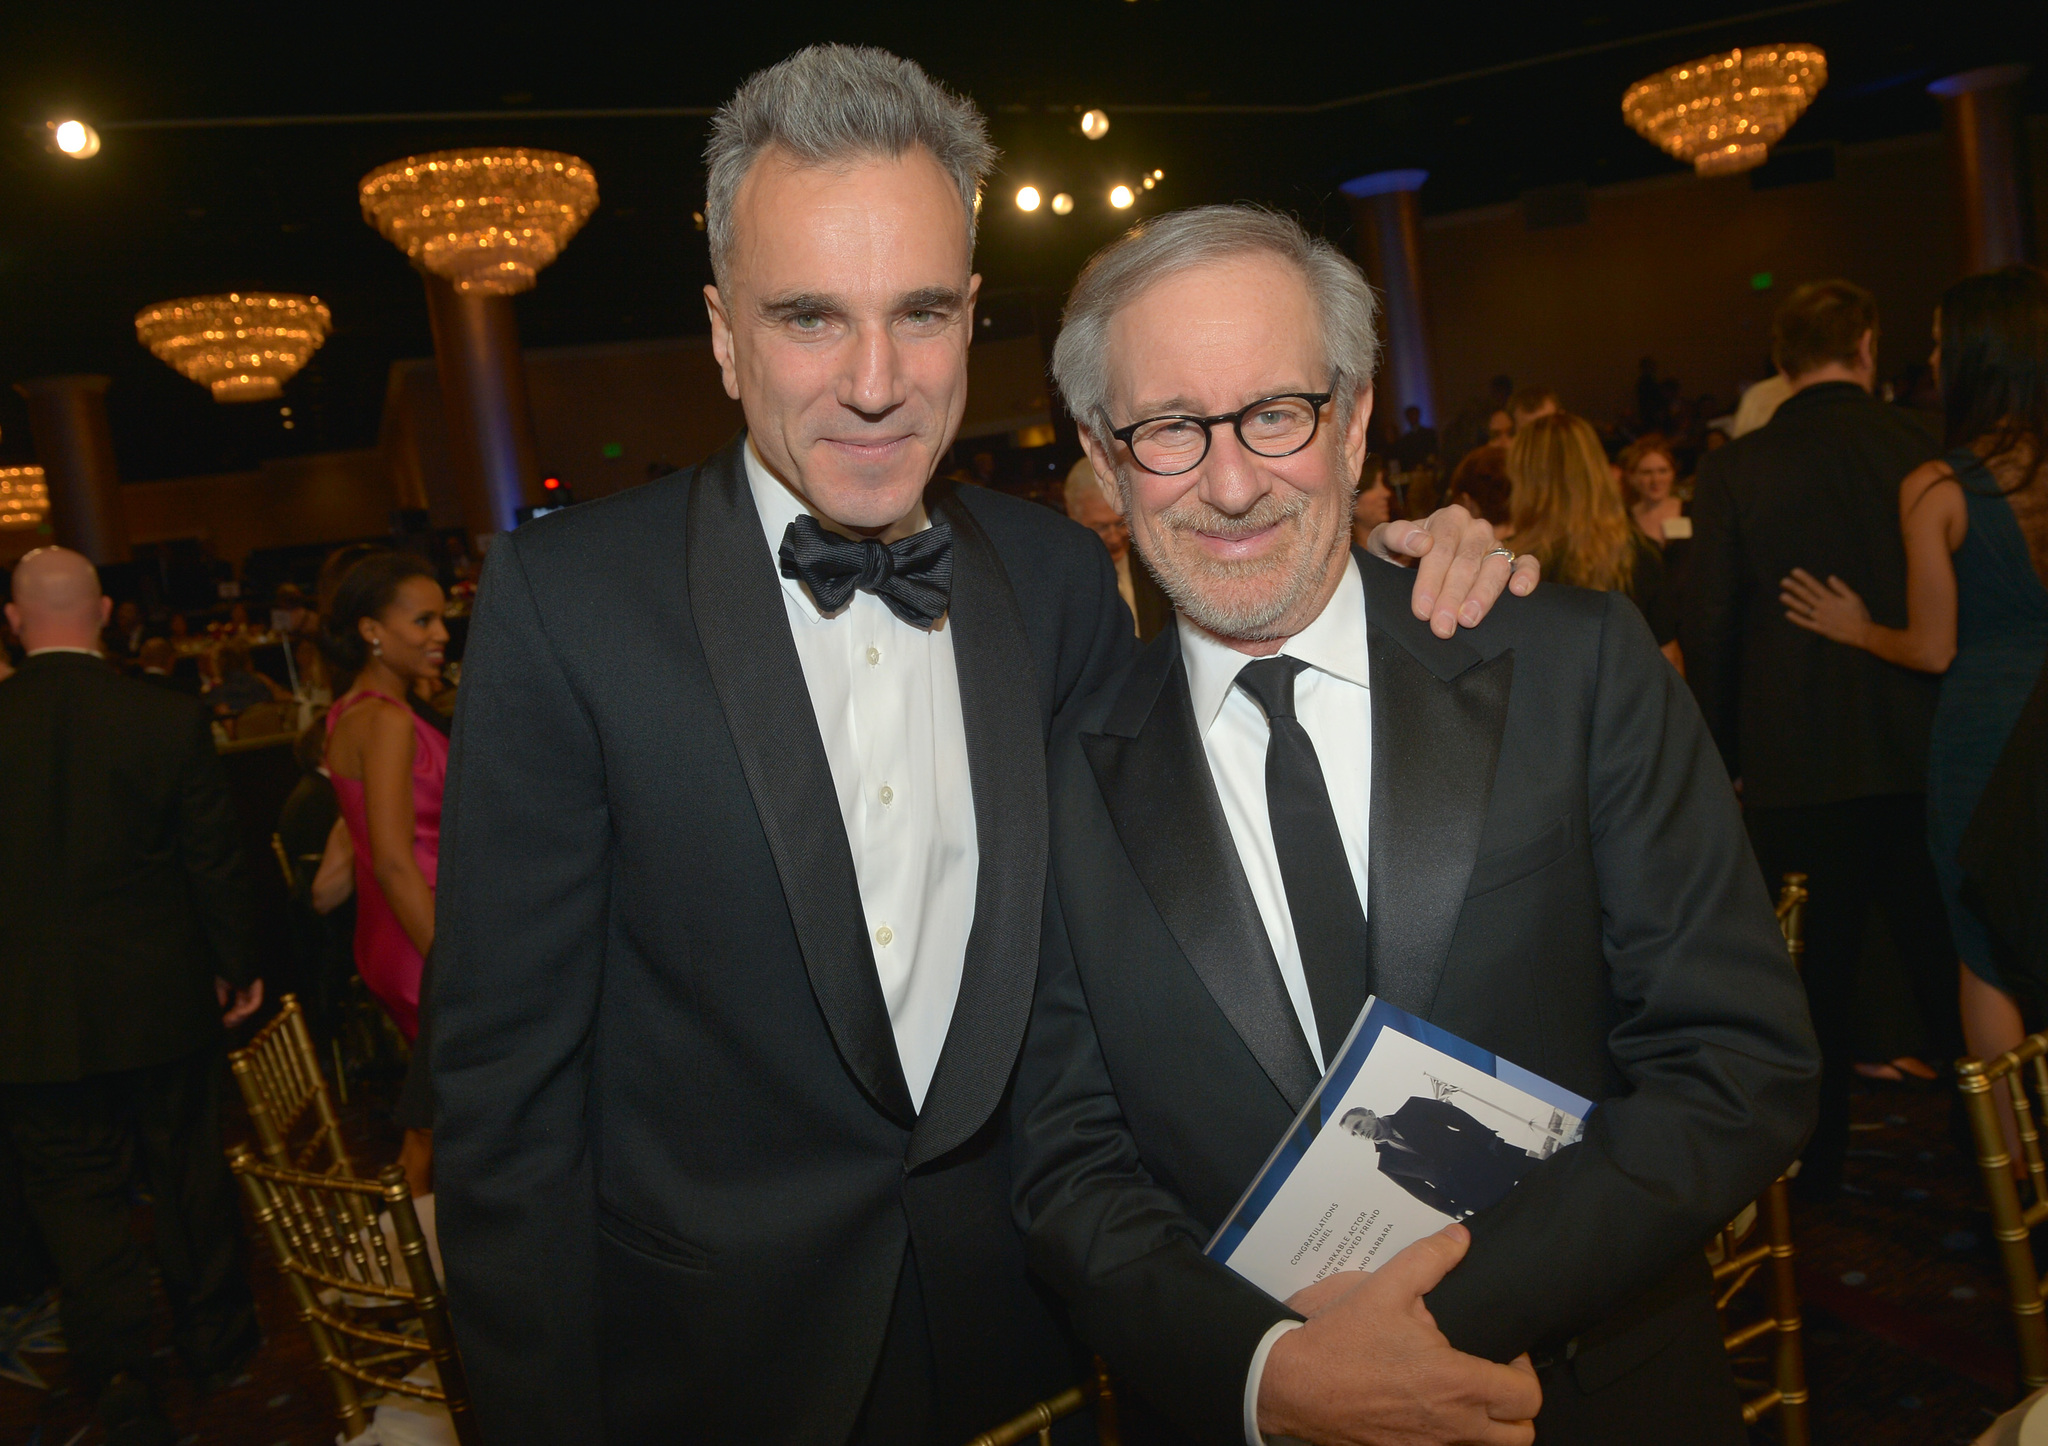 Steven Spielberg and Daniel Day-Lewis